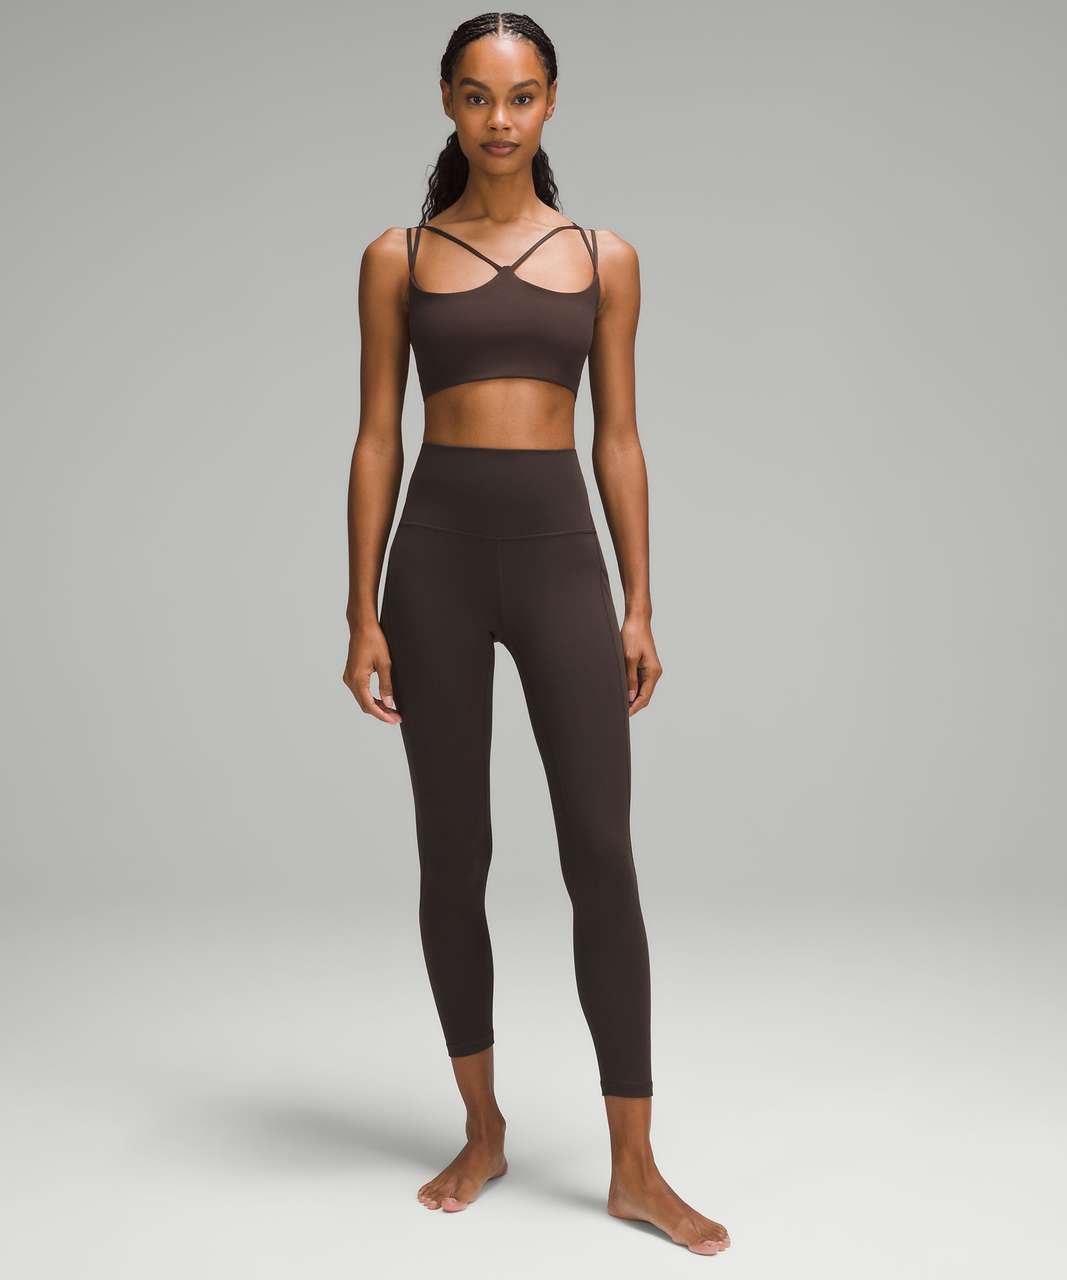 Lululemon Nulu Strappy Yoga Bra Light Support, size 6 - $55 New With Tags -  From Stephanie